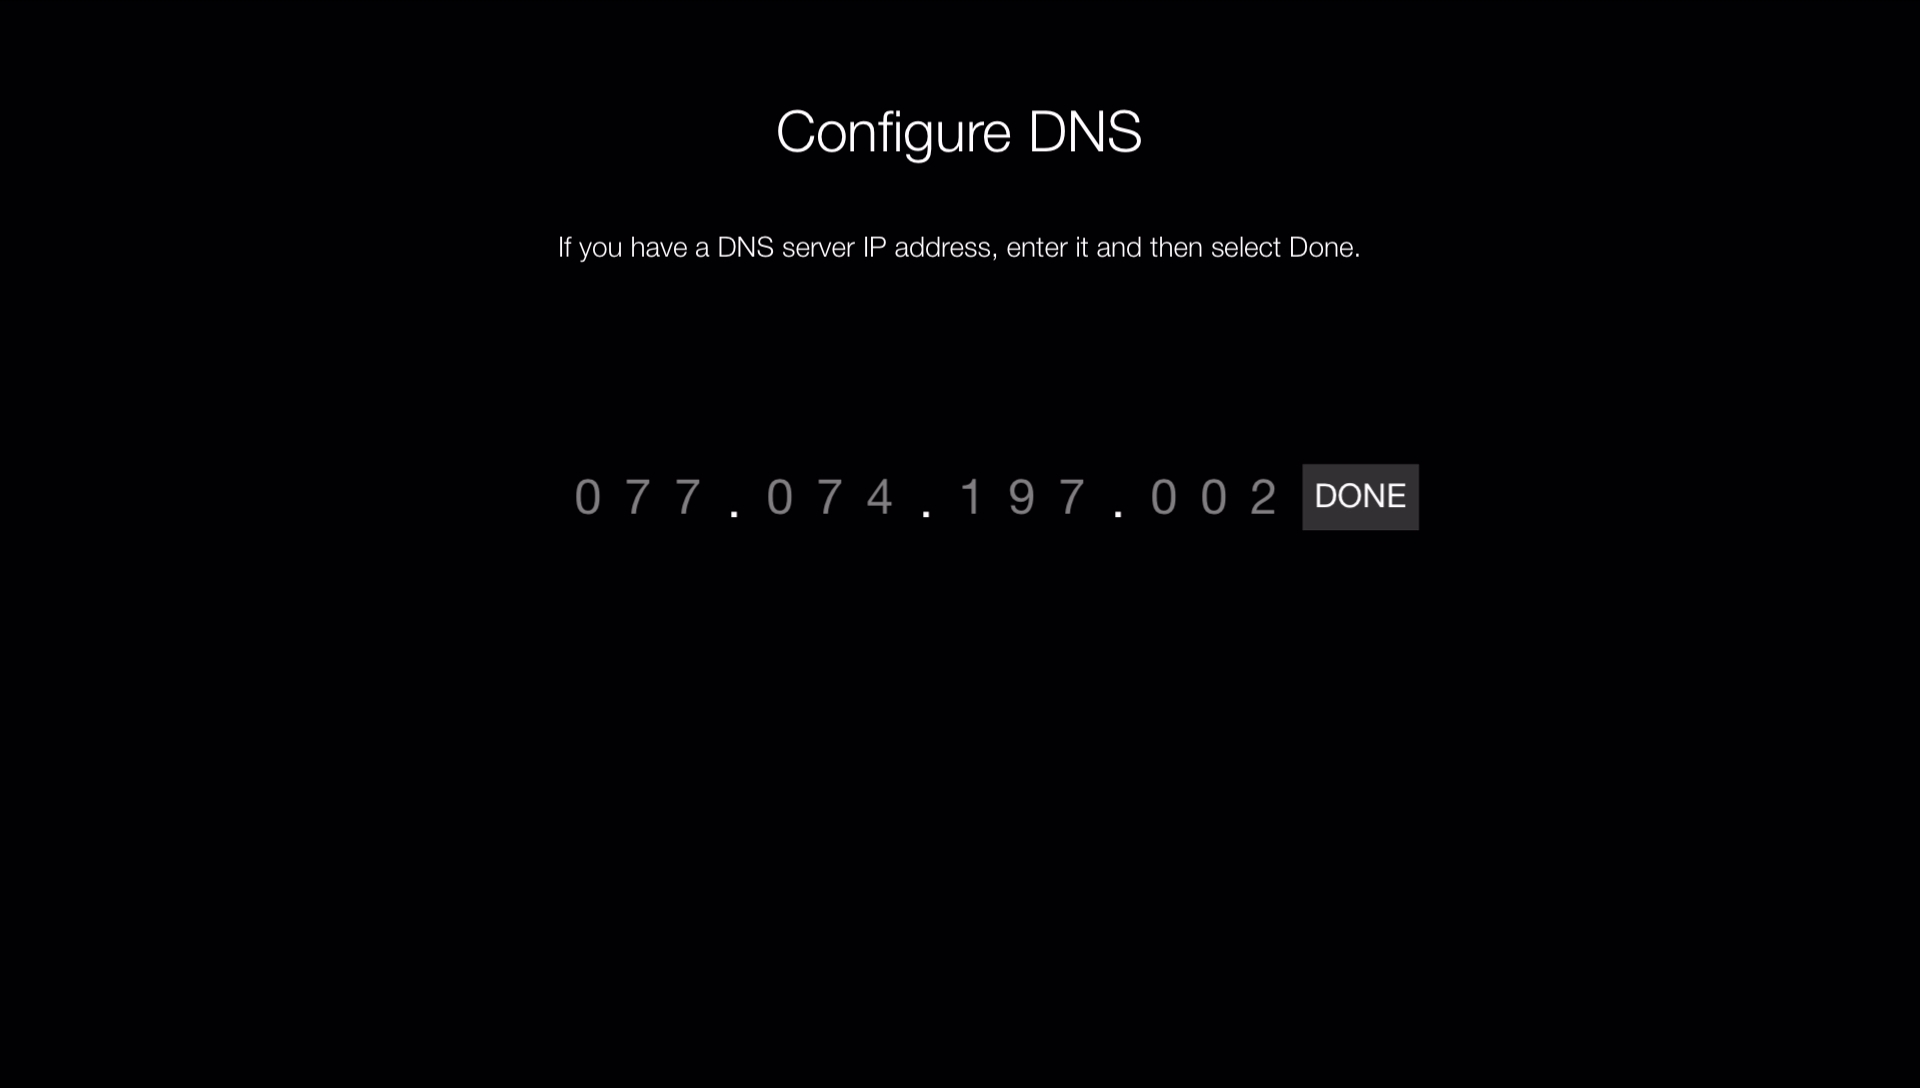 enter the dns address in apple tv